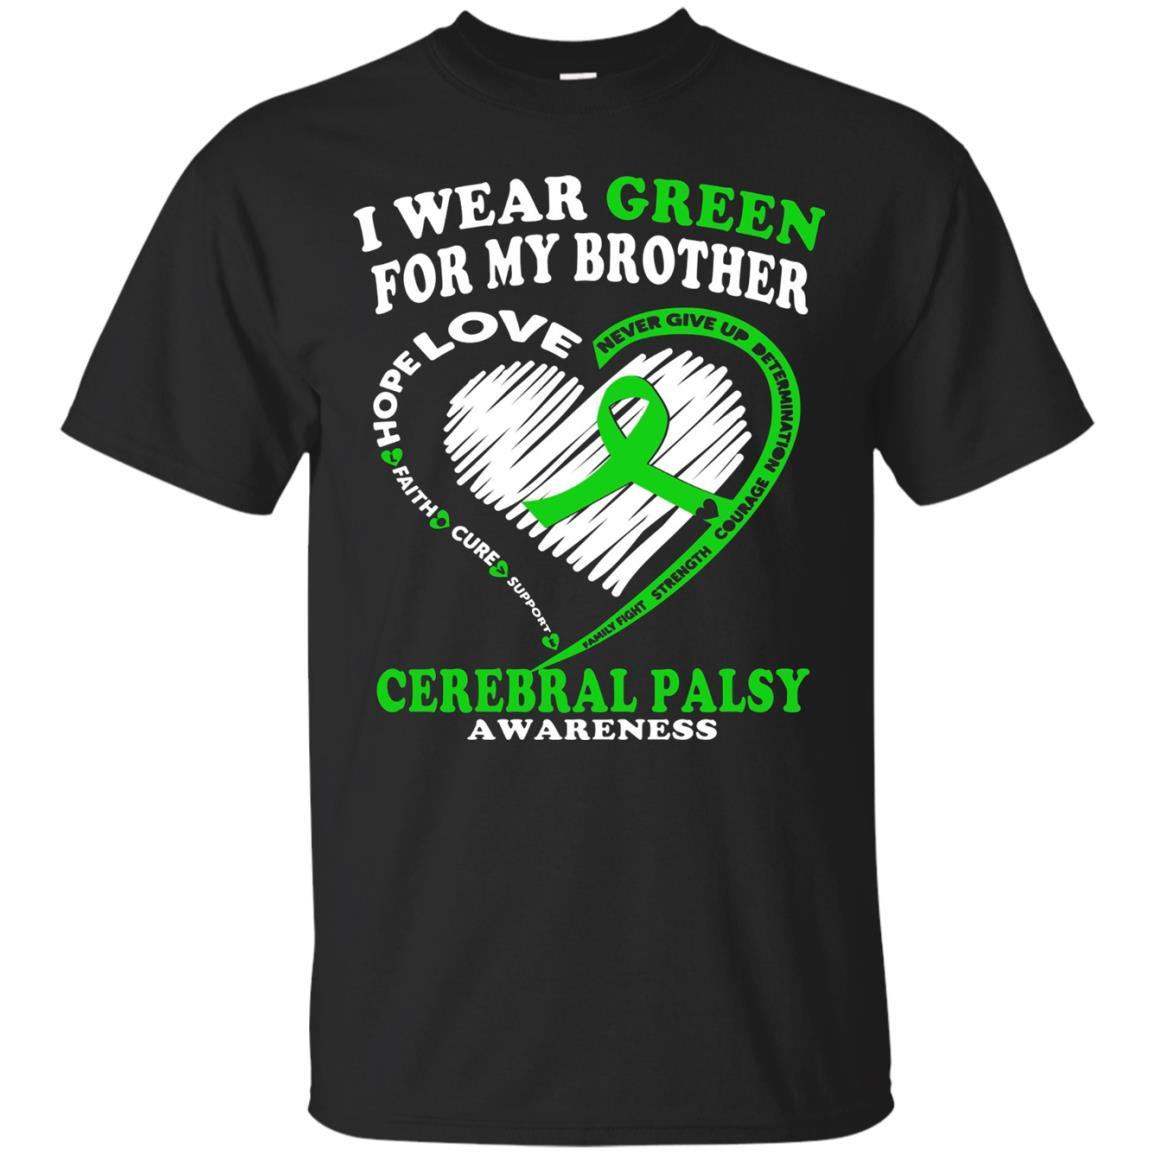 Cerebral Palsy Shirt - I Wear Green For My Brother